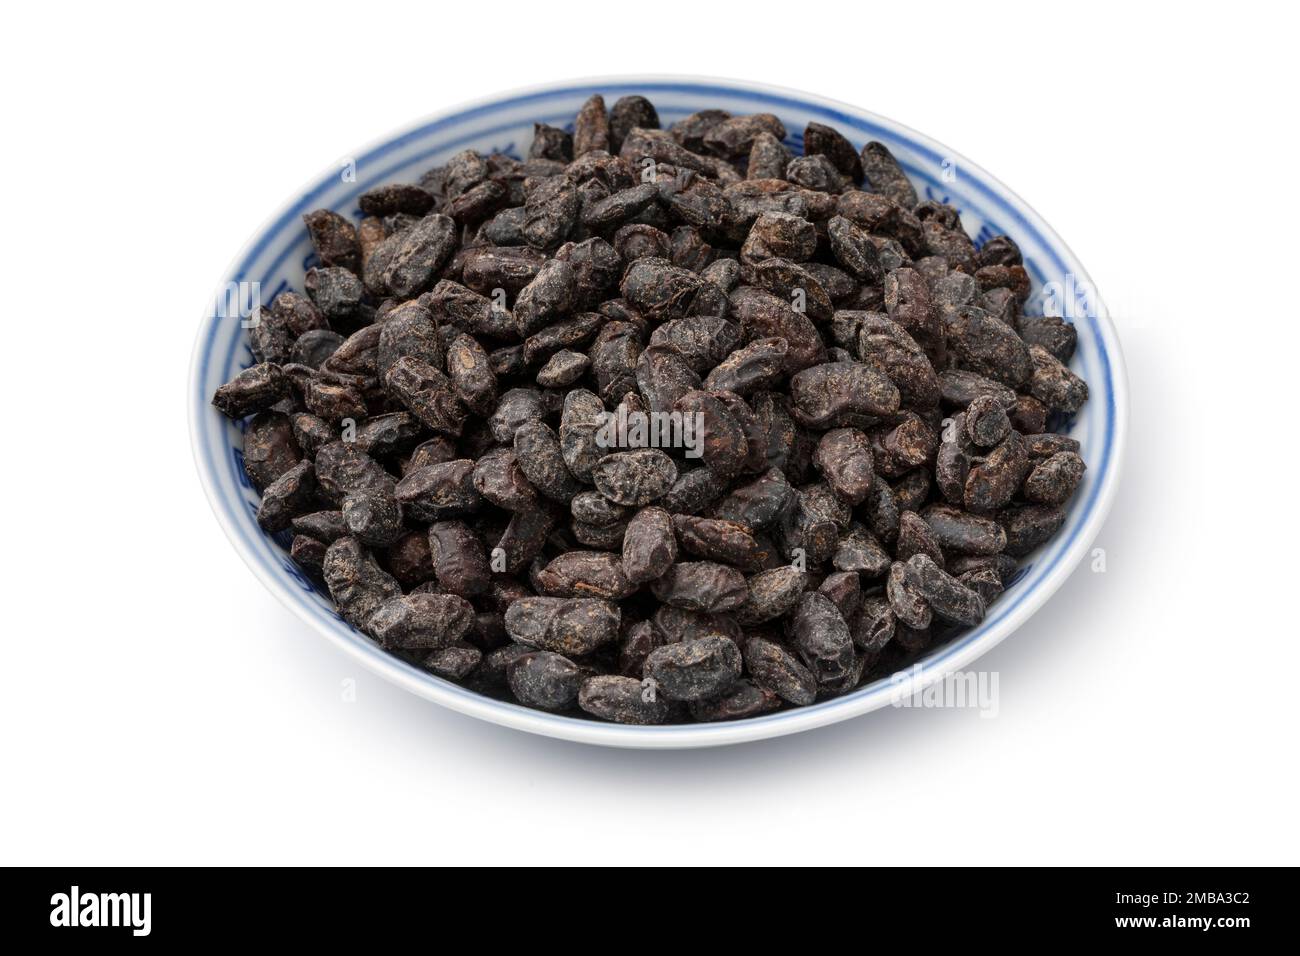 Bowl with Chinese salted black beans as an ingredient close up isolated on white background Stock Photo